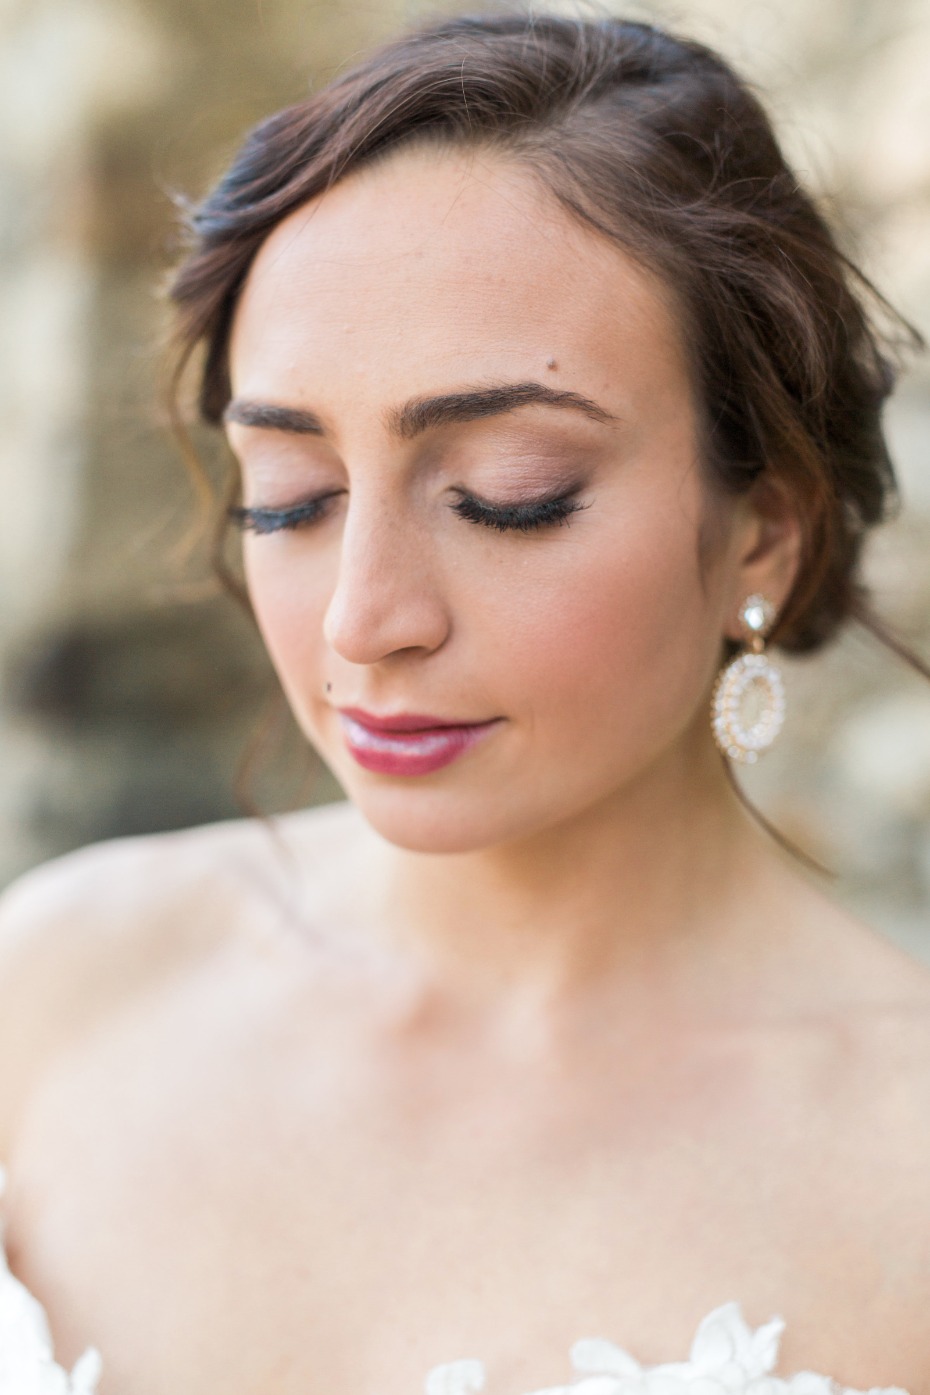 Soft and elegant makeup for the bride